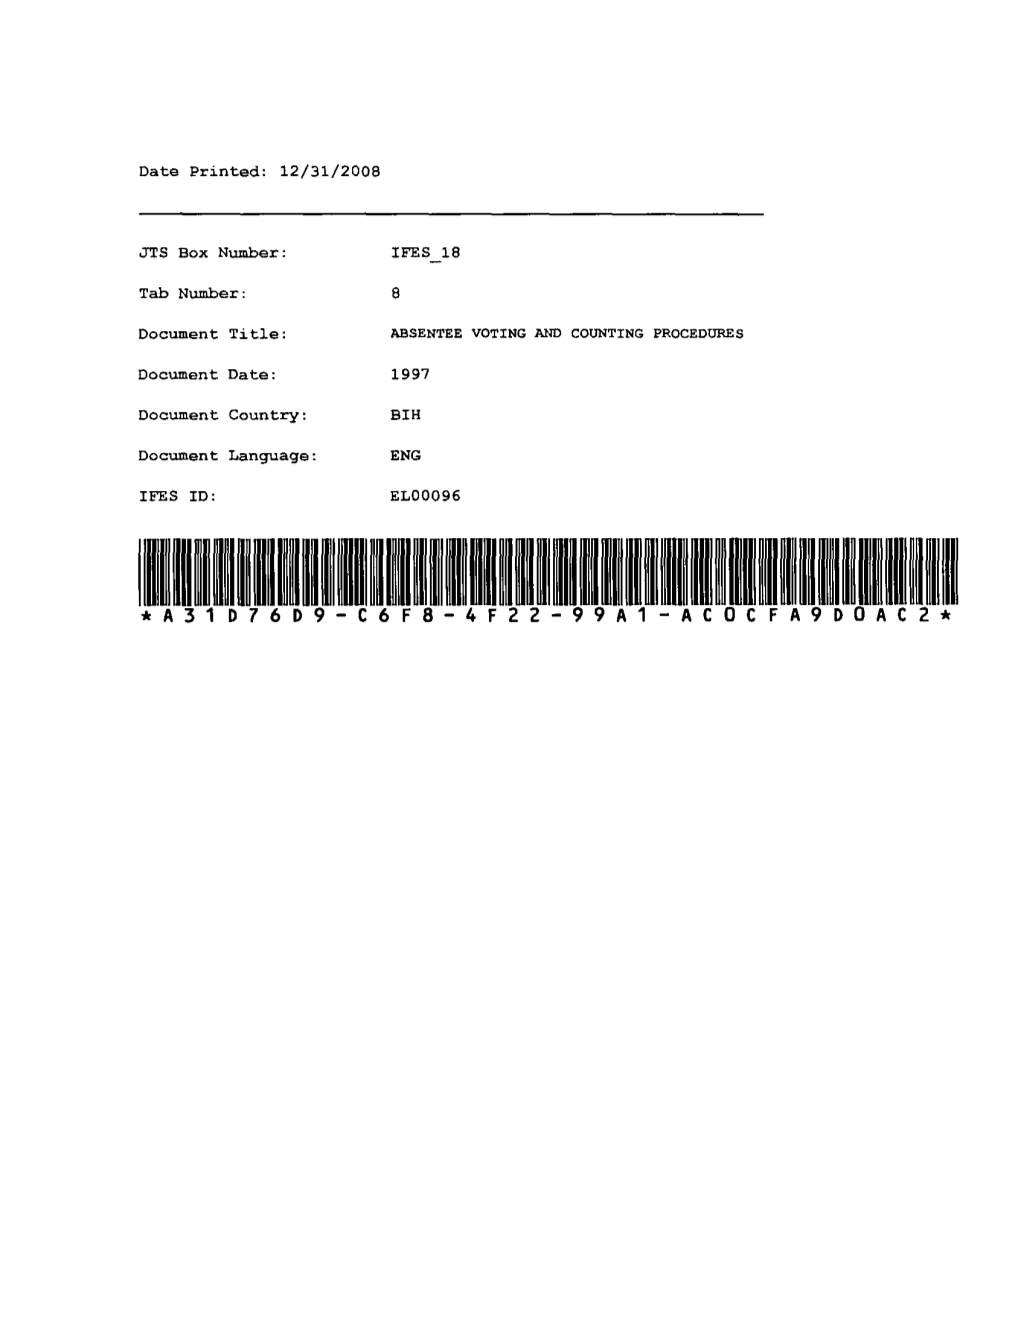 IFES 18 Tab Number: 8 Document Title